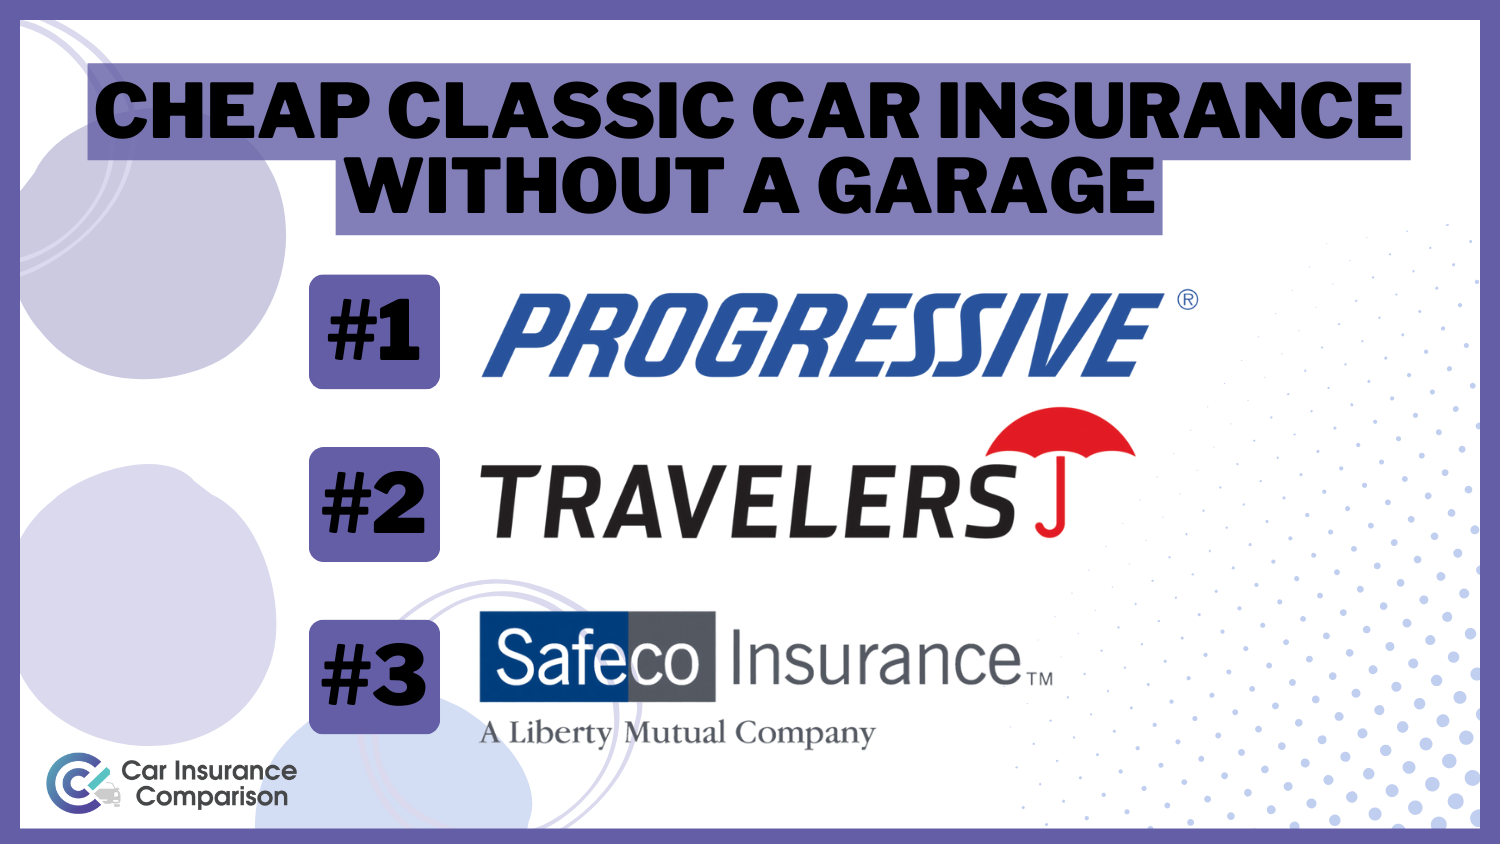 Cheap Classic Car Insurance Without a Garage: Progressive, Travelers, Safeco